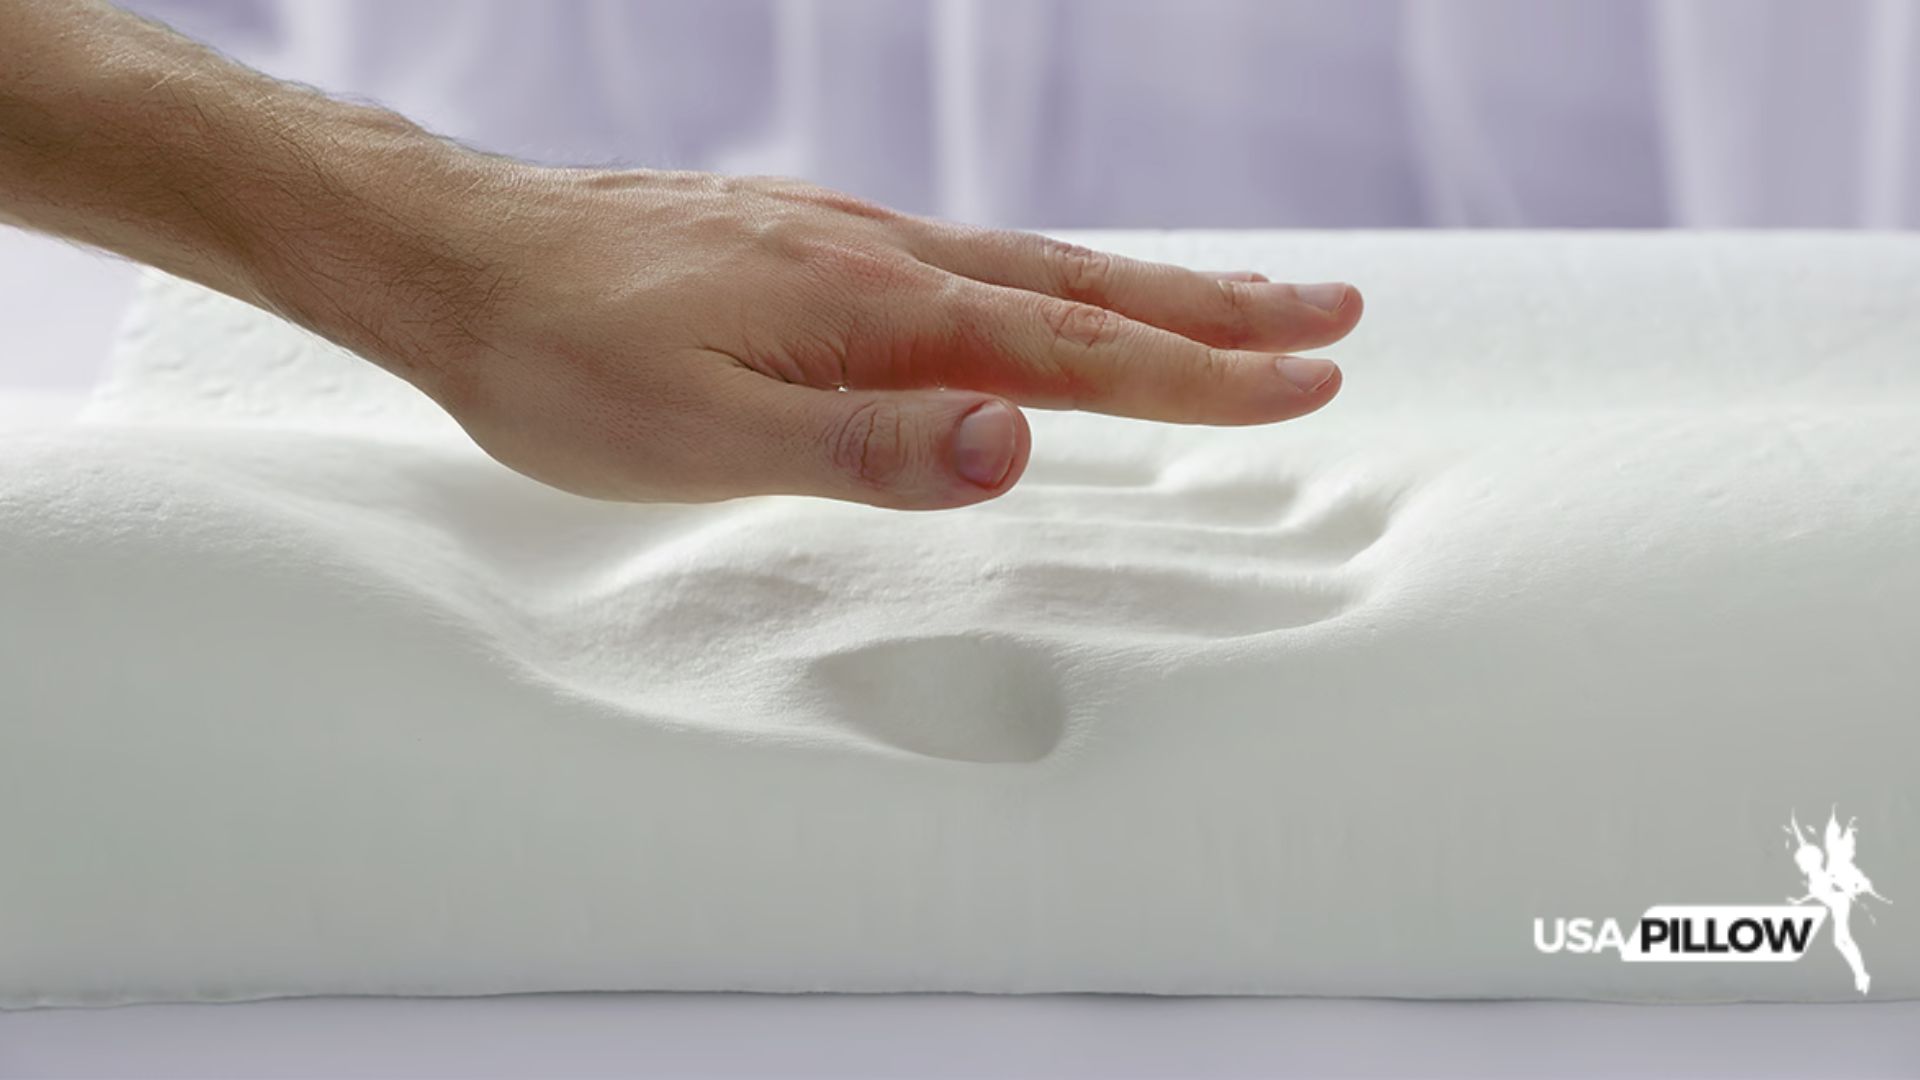 Close-up of memory foam material to showcase its texture and quality.